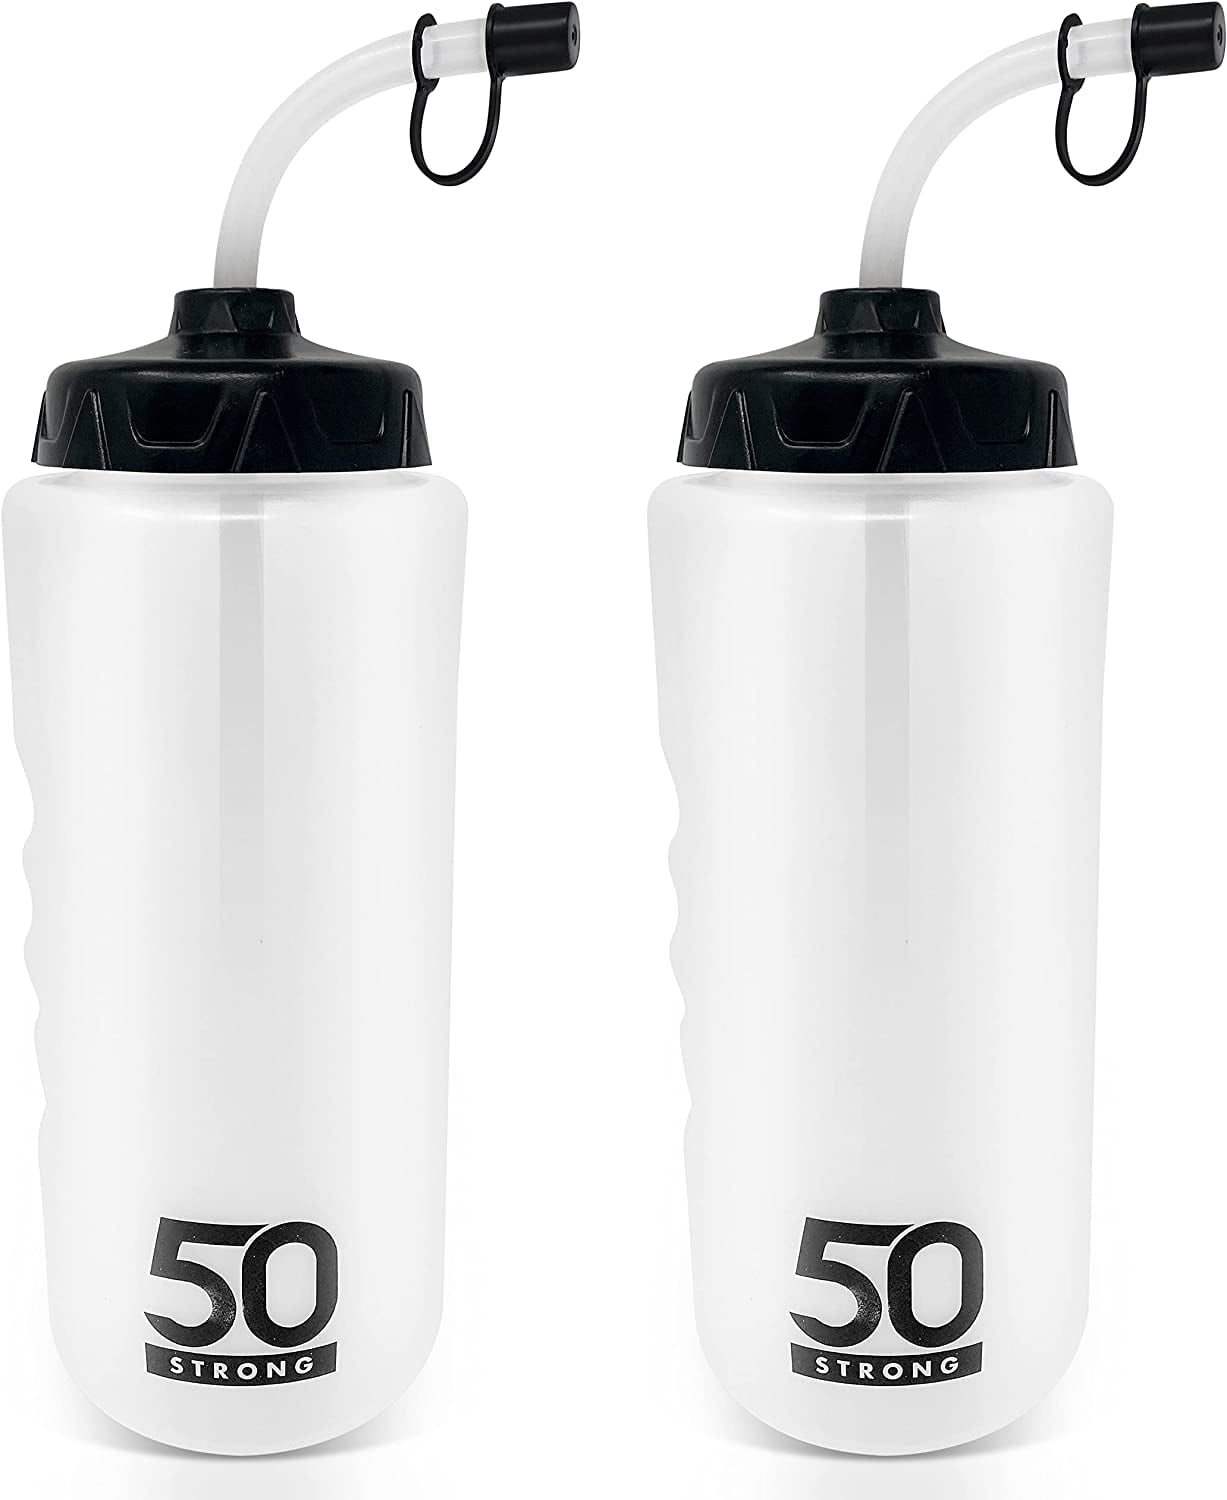 50 Strong Brand Sports Squeeze Water Bottles - Set of 6 - Team Pack – 22  oz. BPA Free Bottle Easy Open Push/Pull Cap – Multiple Colors Available